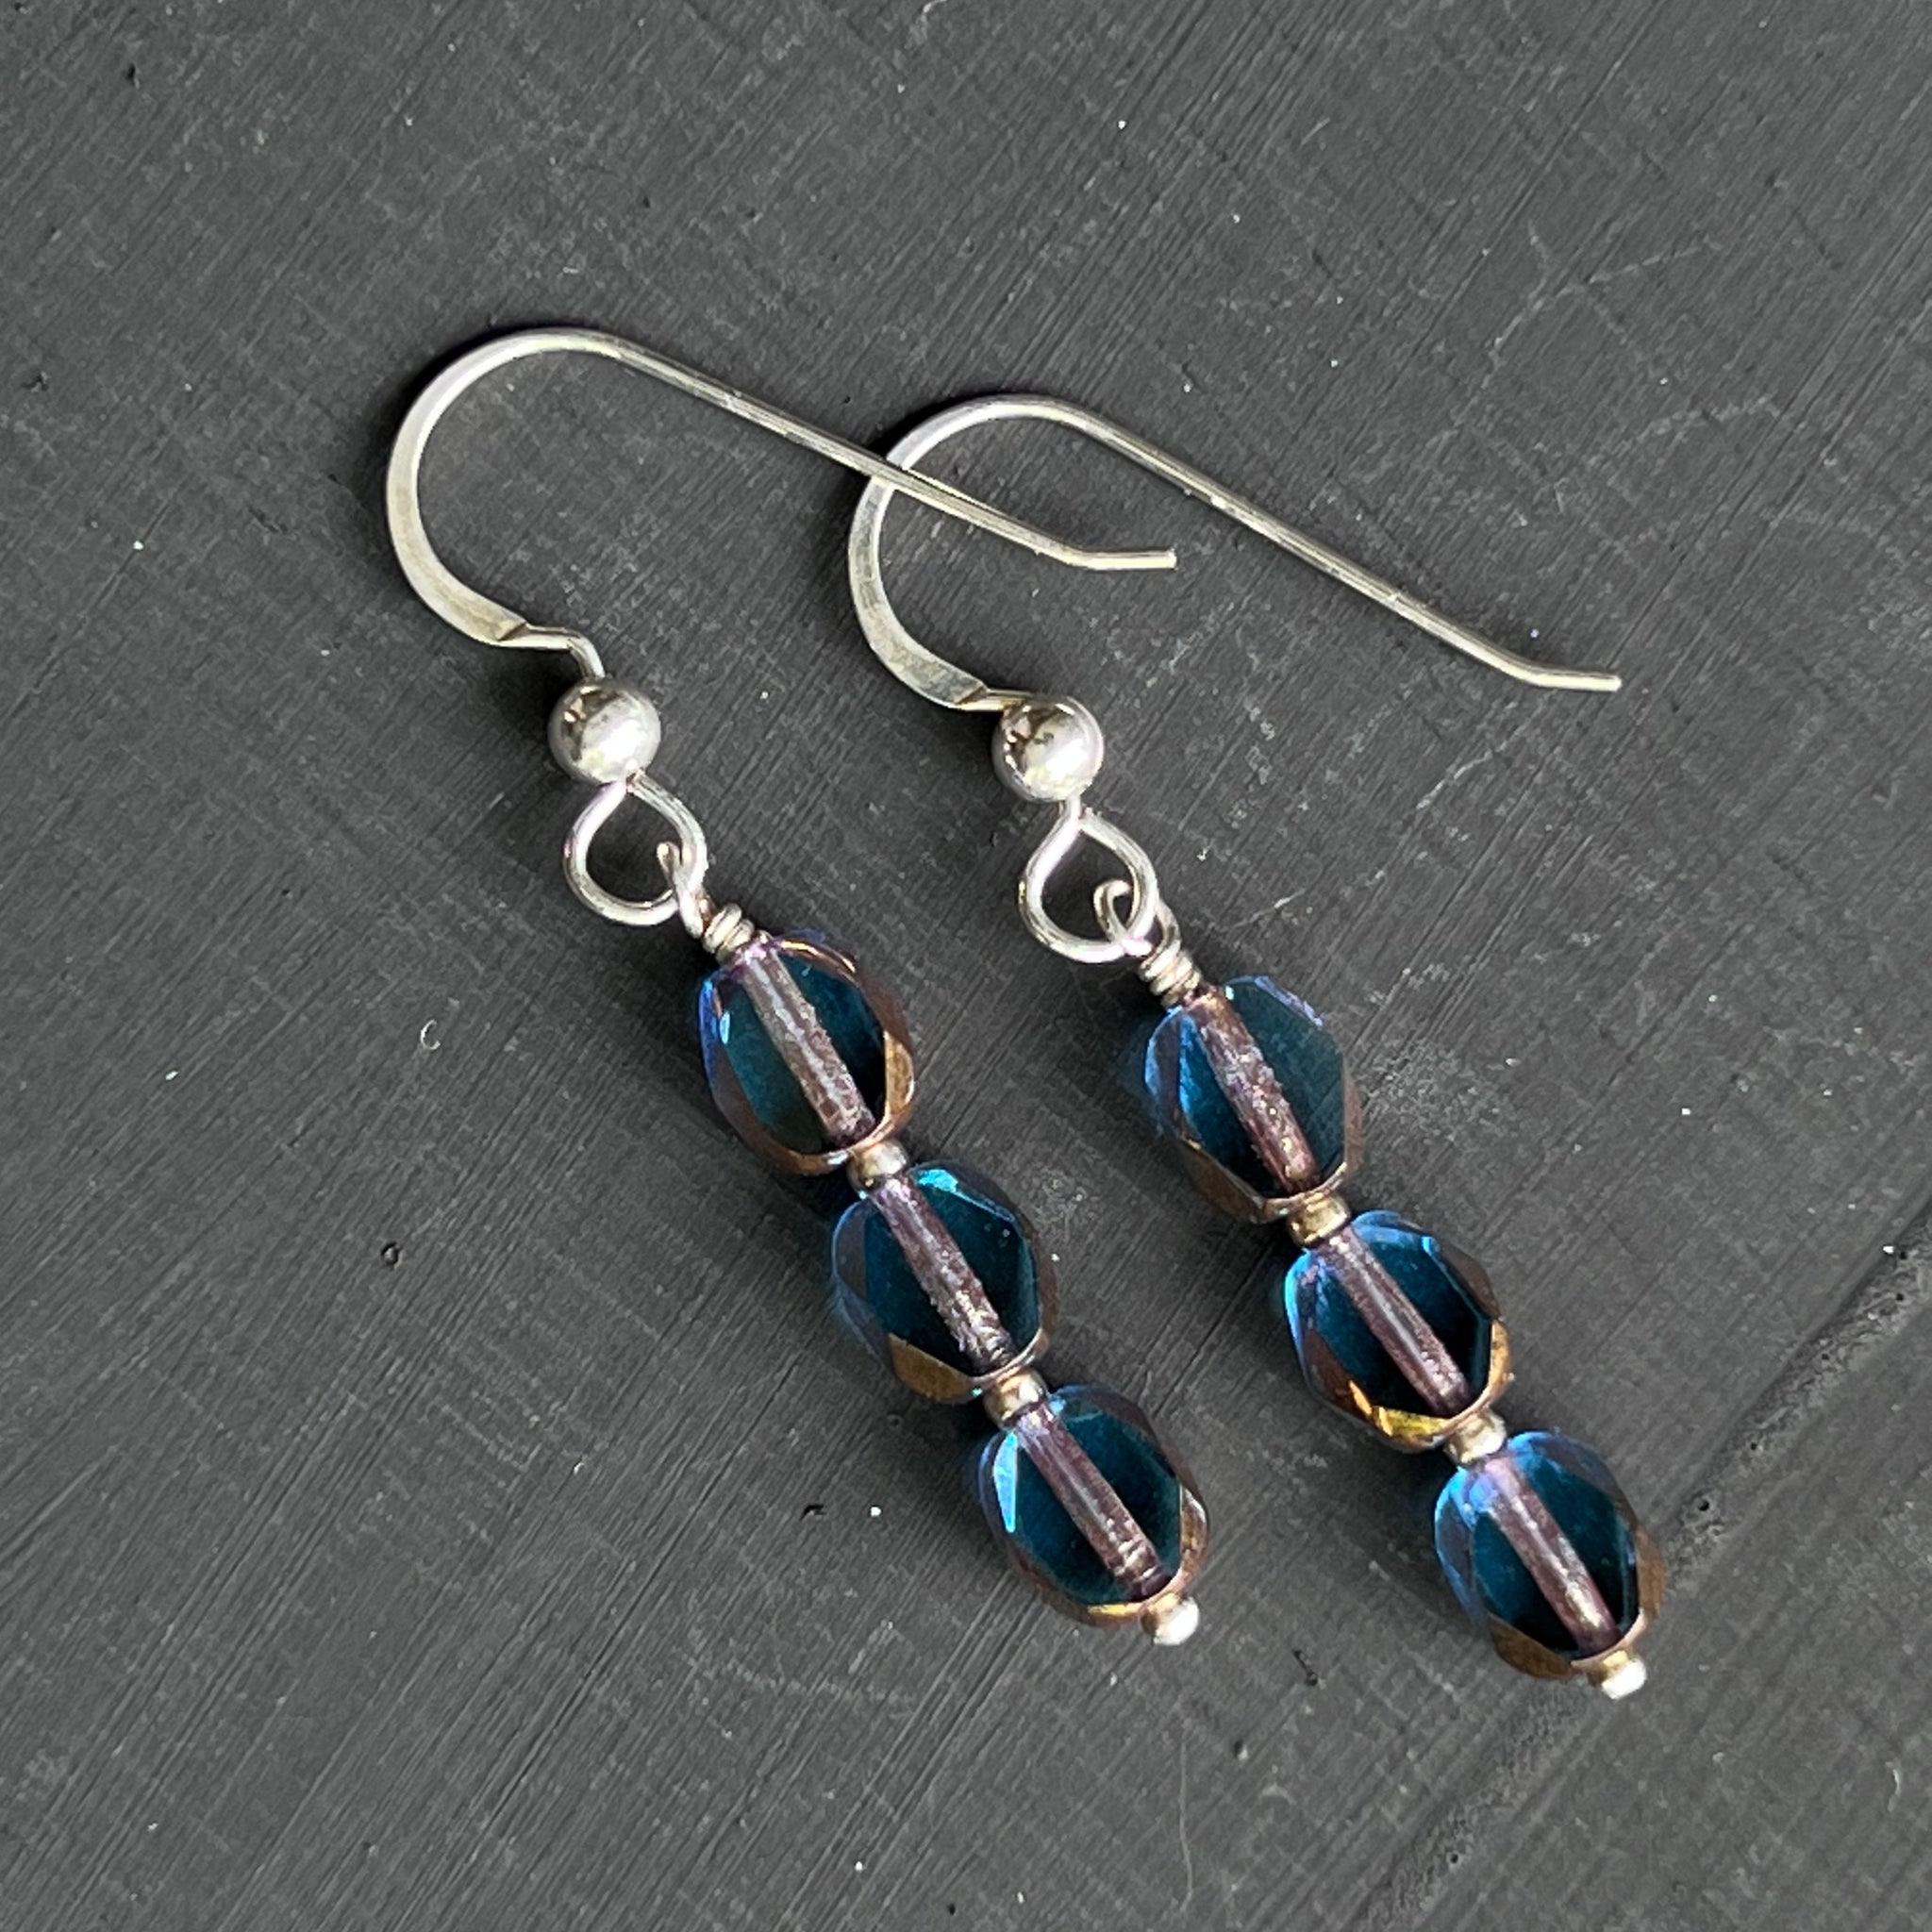 Blue with bronze edges earrings